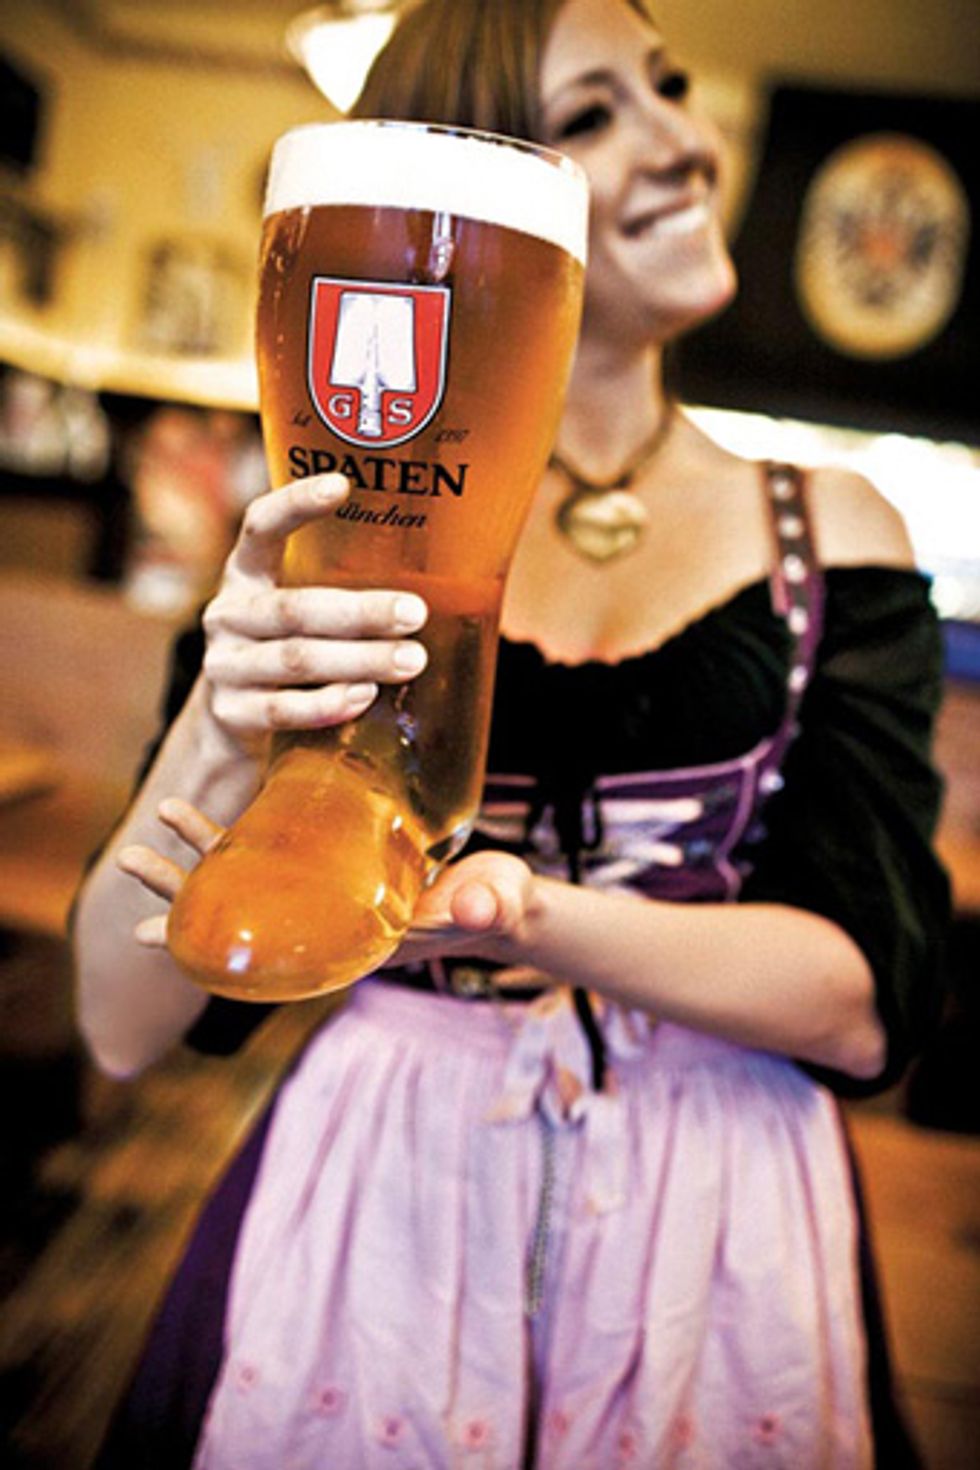 Local Beer Experts' Tips On Getting In Gear for Oktoberfest